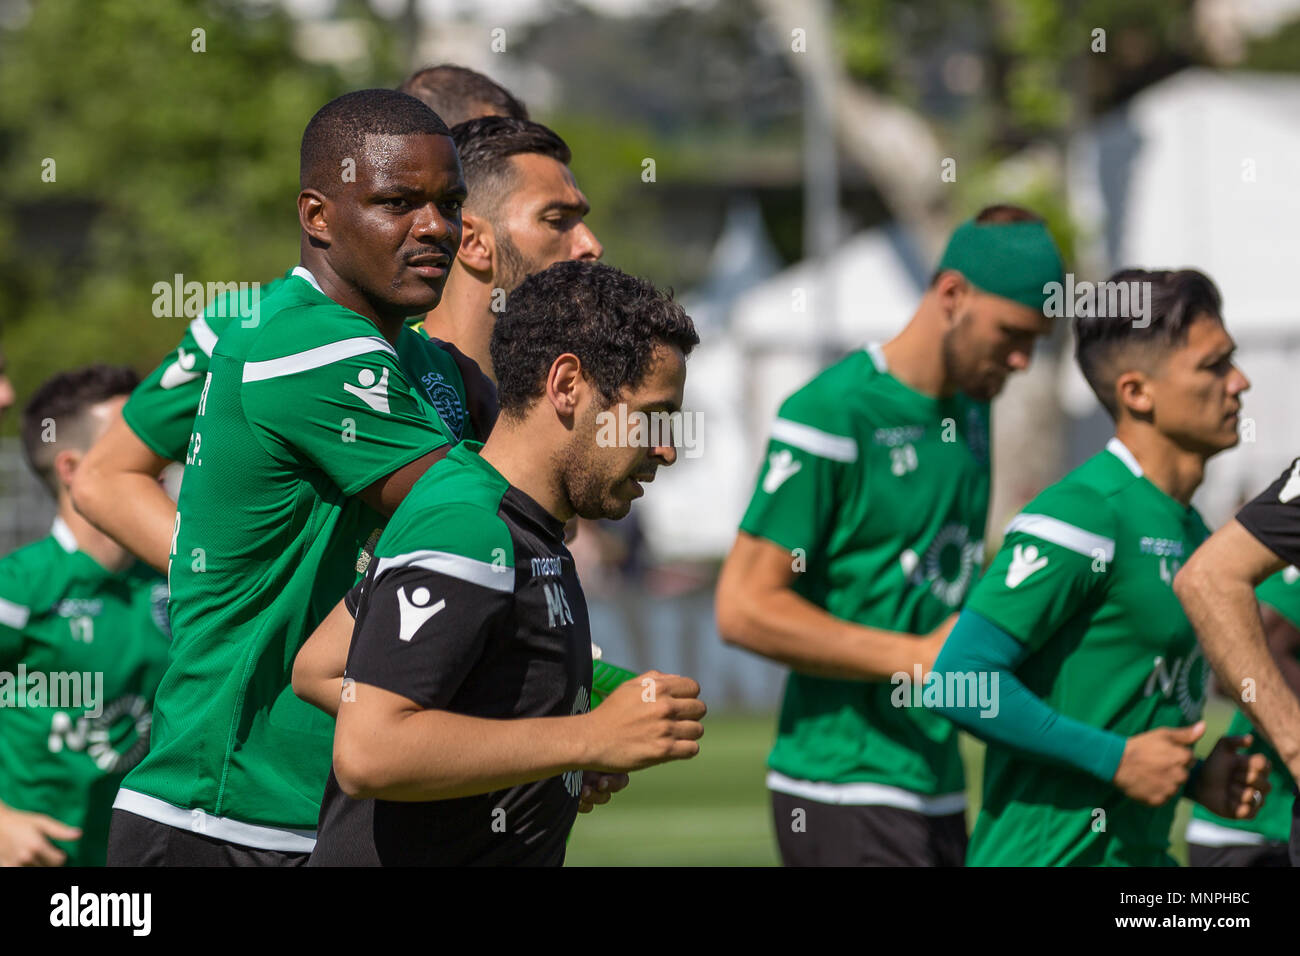 Lisbon, Portugal, May 19, 2018. Sportings midfielder from Portugal William Carvalho (14) in action during the practice for the final of the Portuguese Cup © Alexandre de Sousa/Newzulu Credit: Alexandre Sousa/Alamy Live News Stock Photo